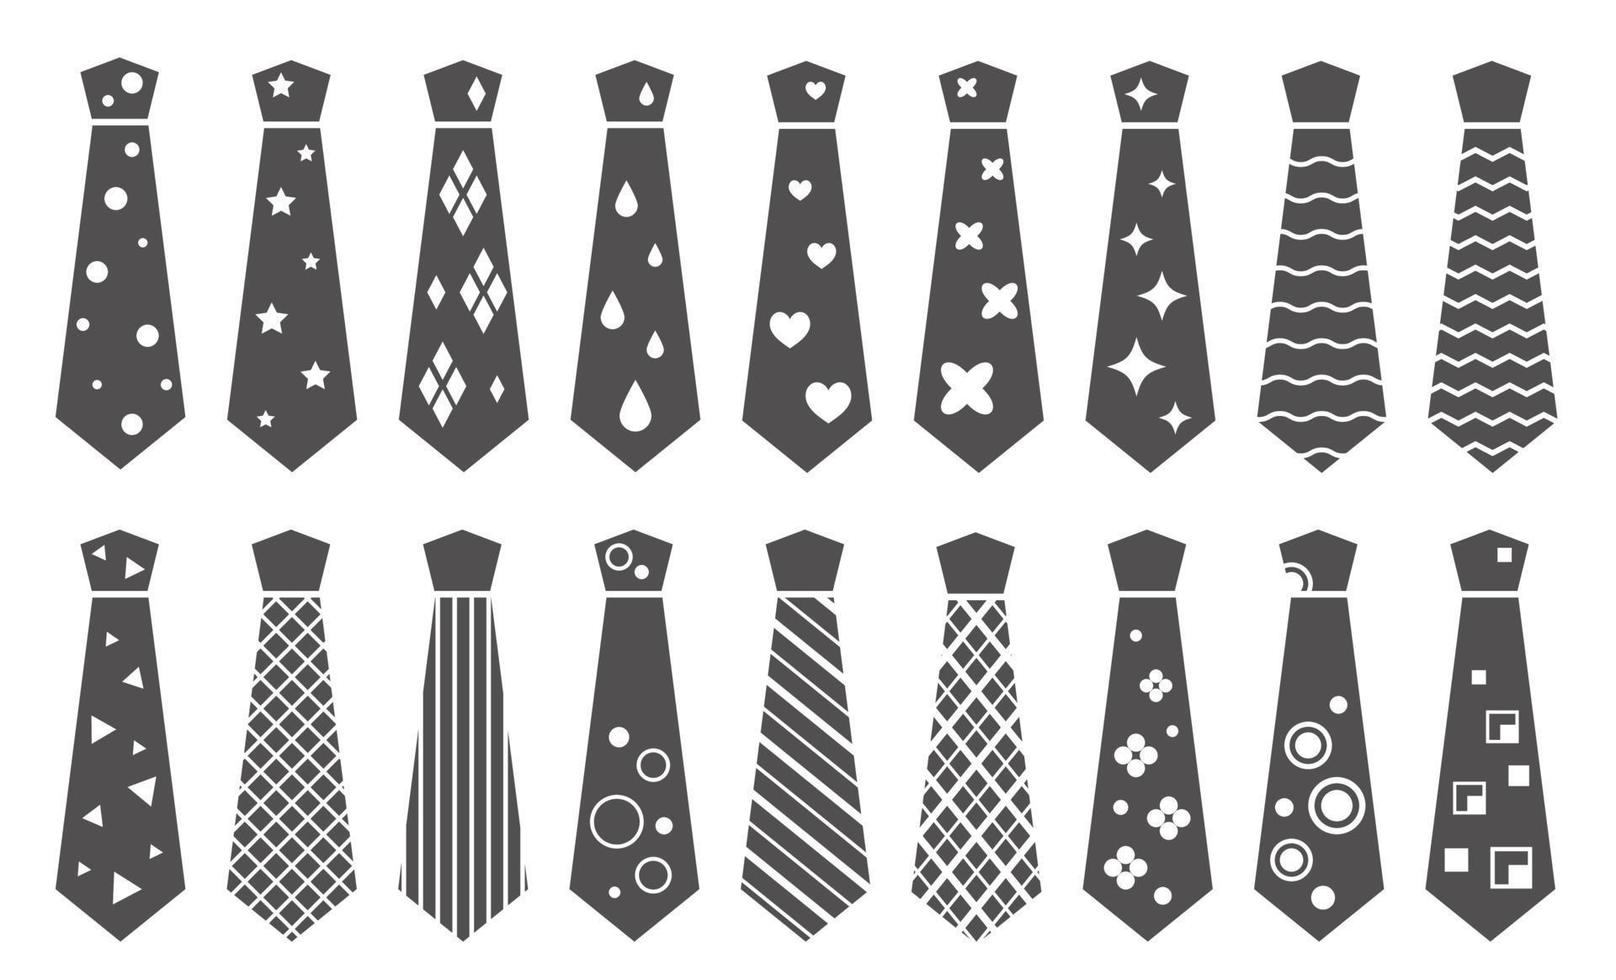 Black ties silhouettes on white background. Necktie icon set for cloth design. Vector illustration.